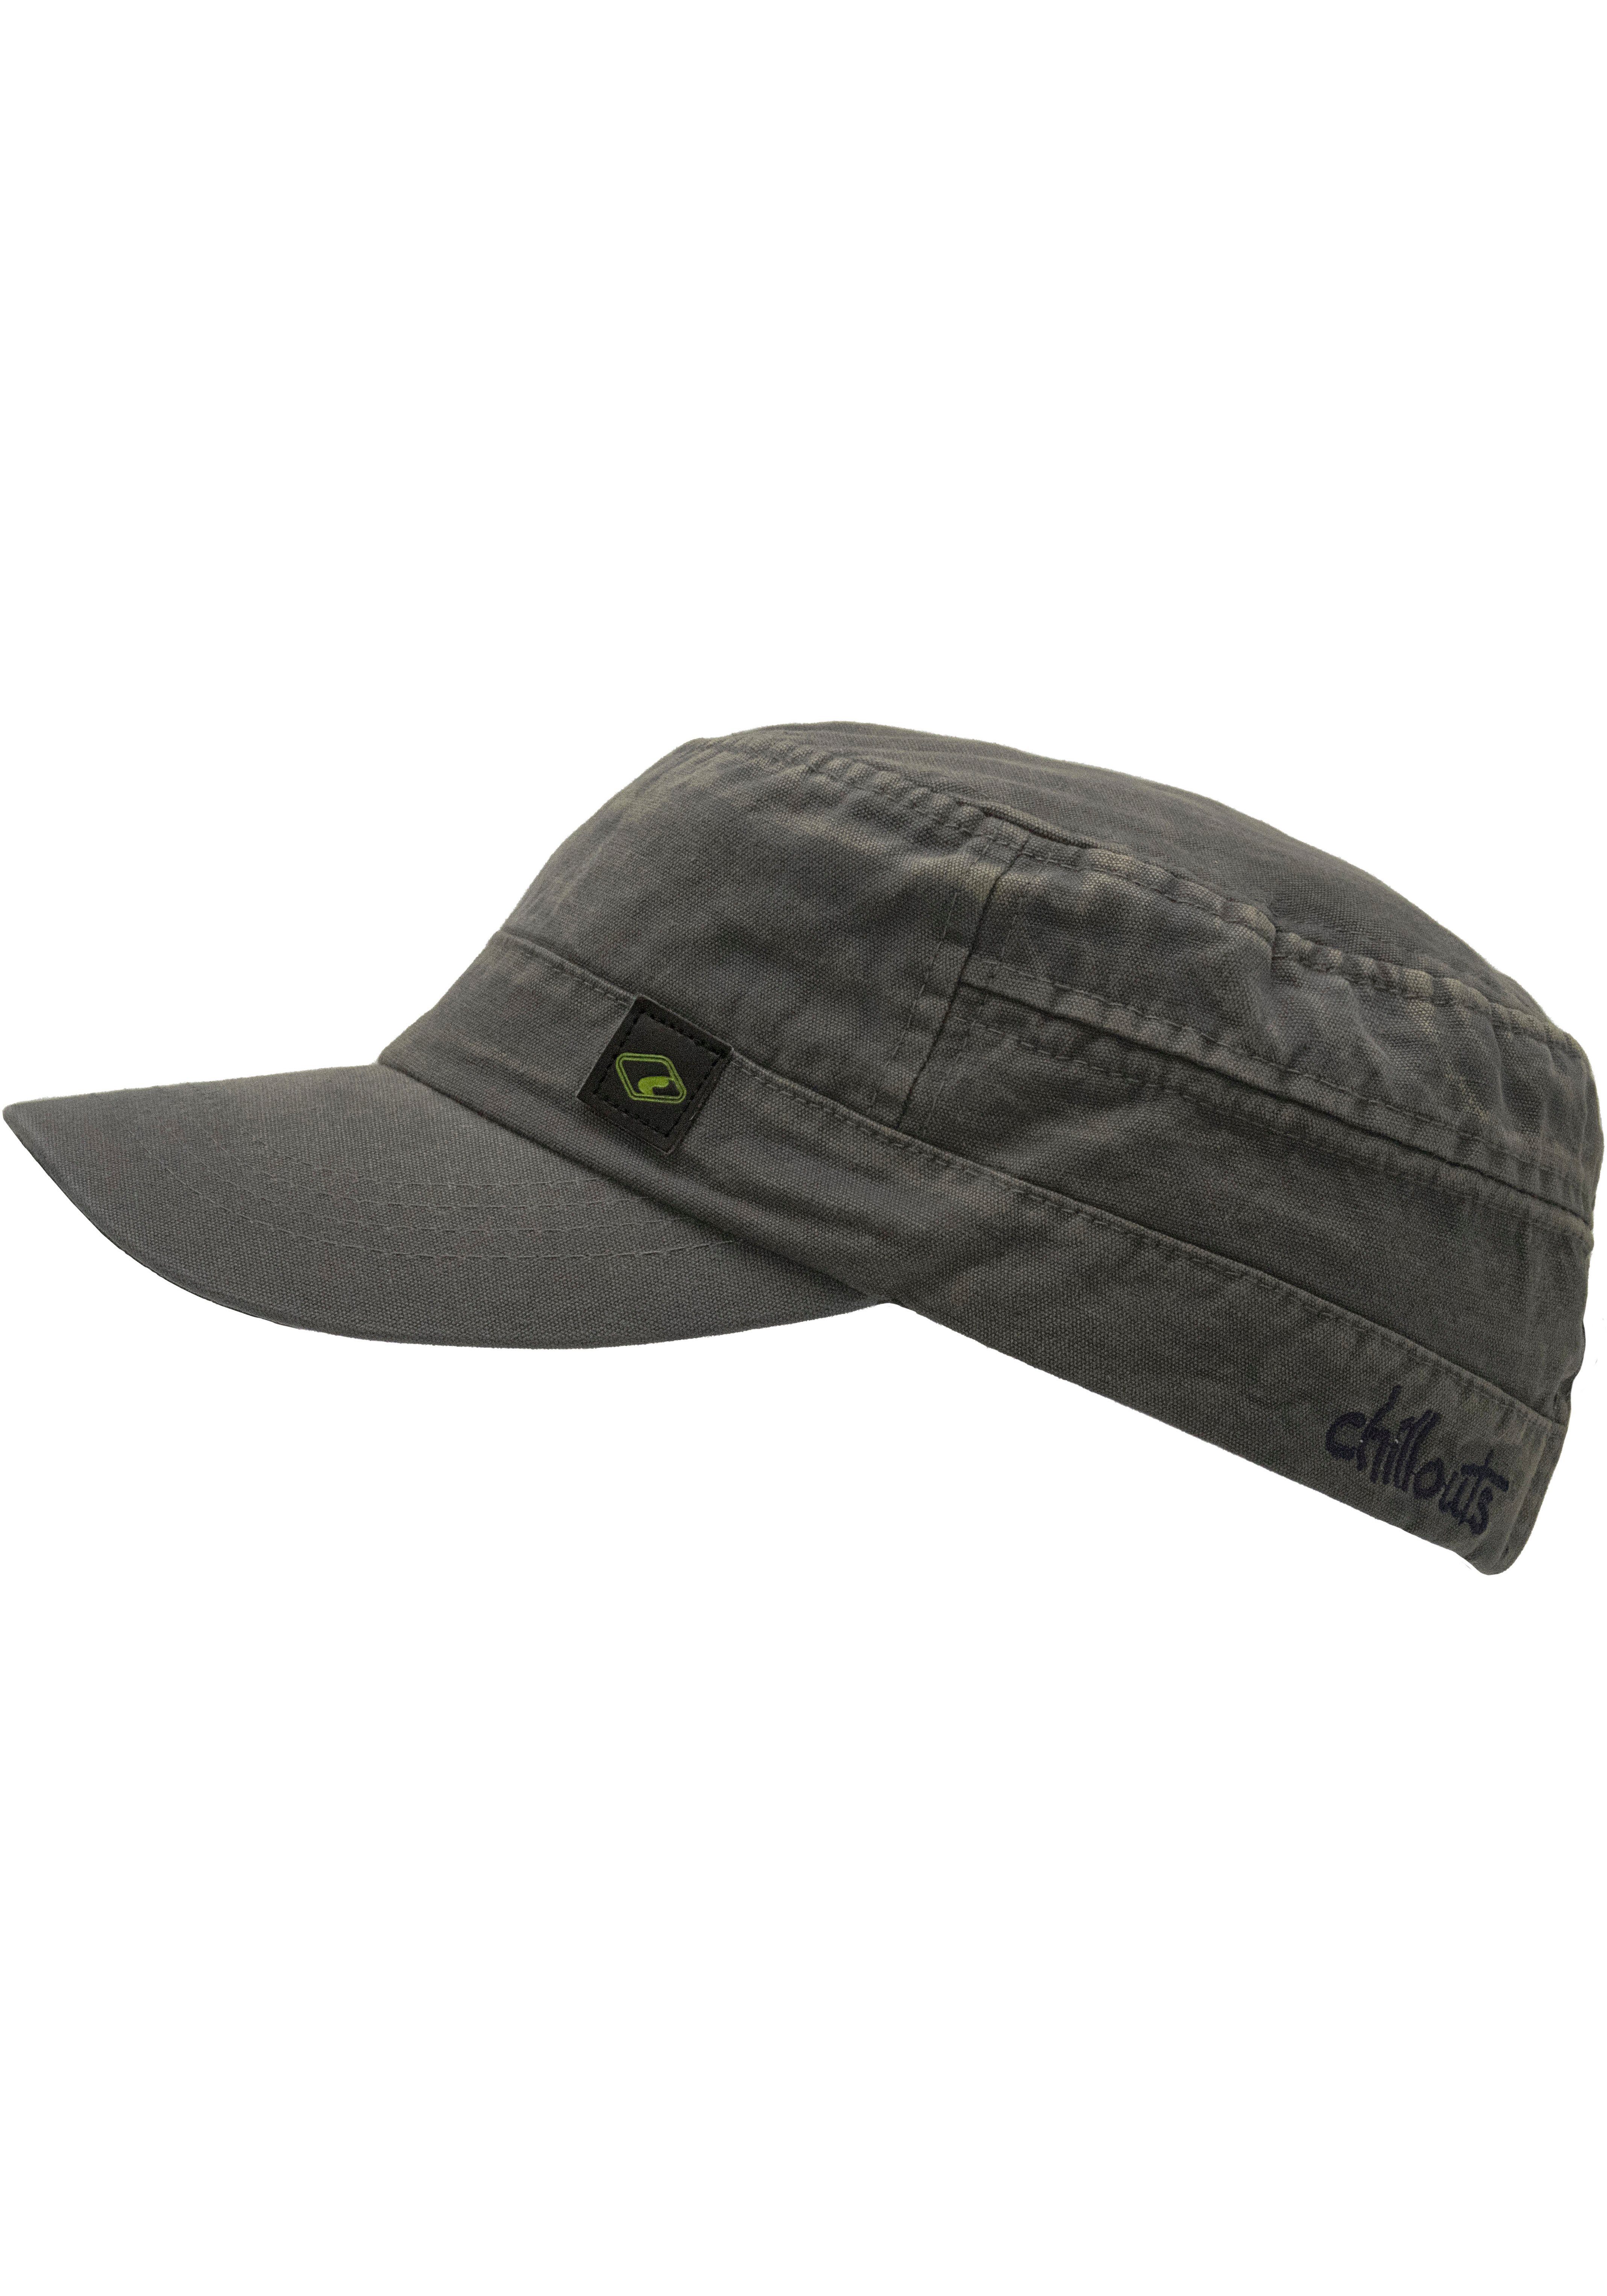 Baumwolle, aus Army grey reiner Cap Hat Size Paso washed chillouts atmungsaktiv, El One